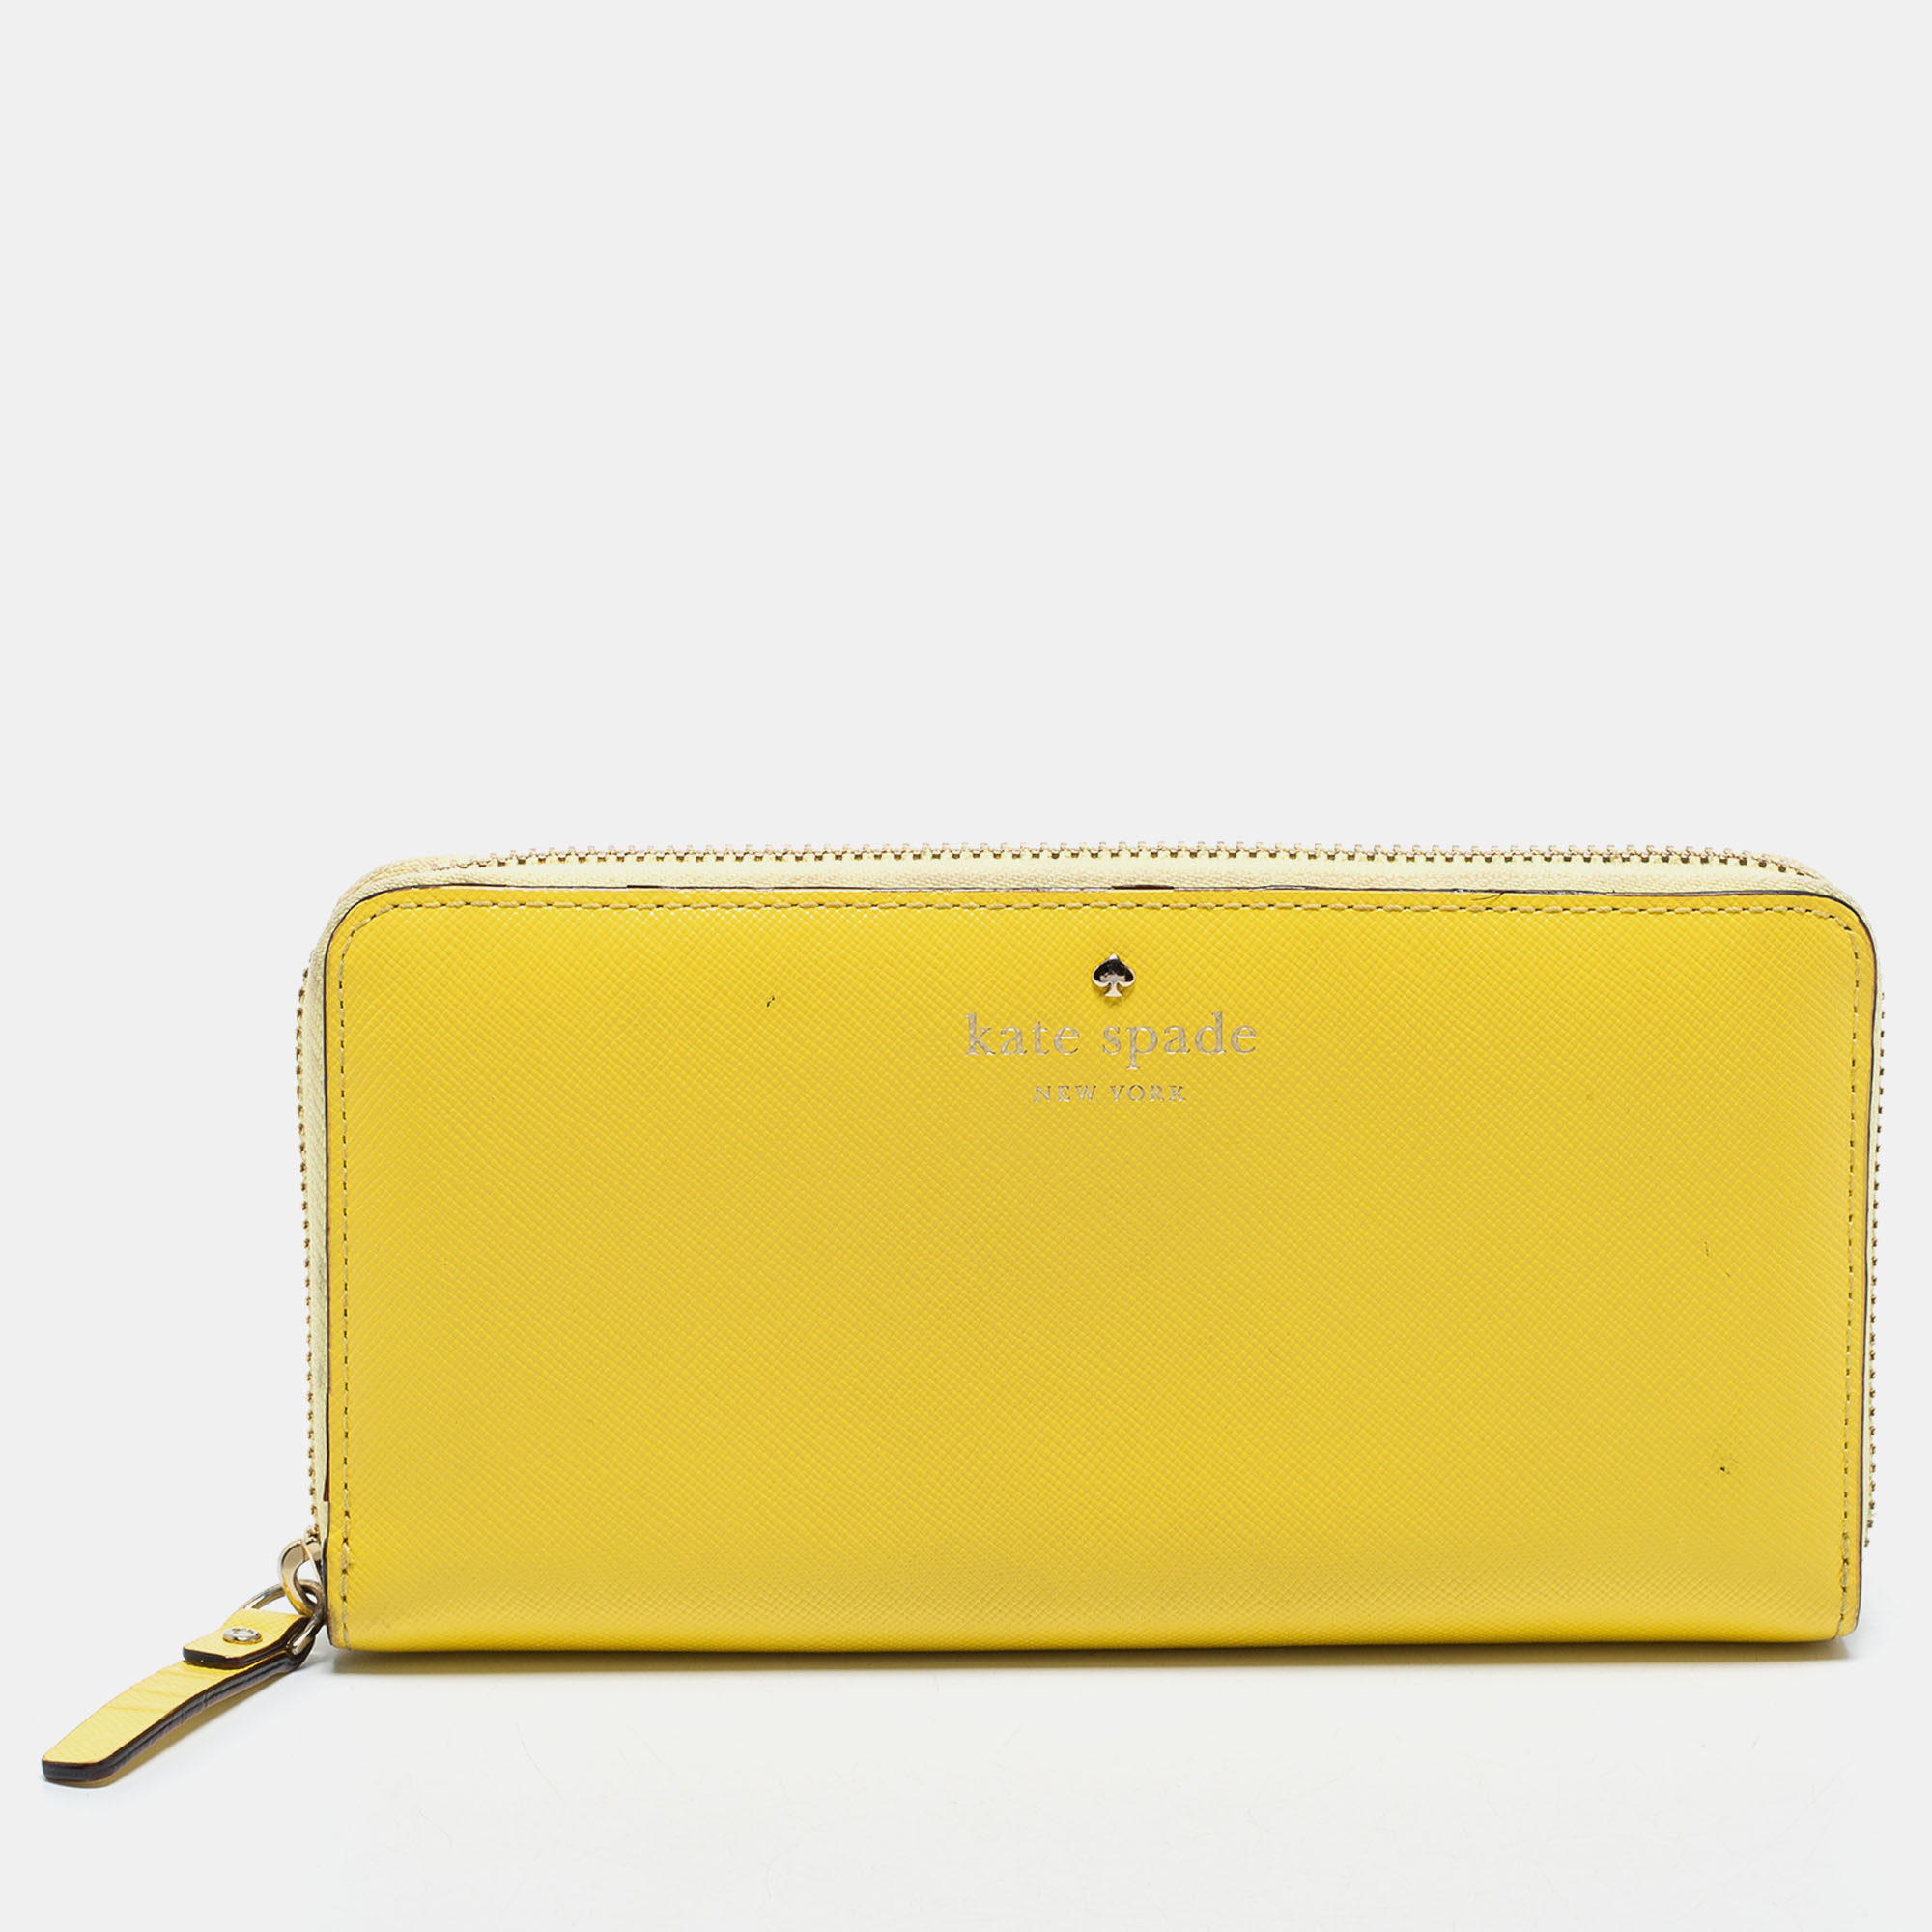 Pre-owned Kate Spade Yellow Leather Zip Around Wallet